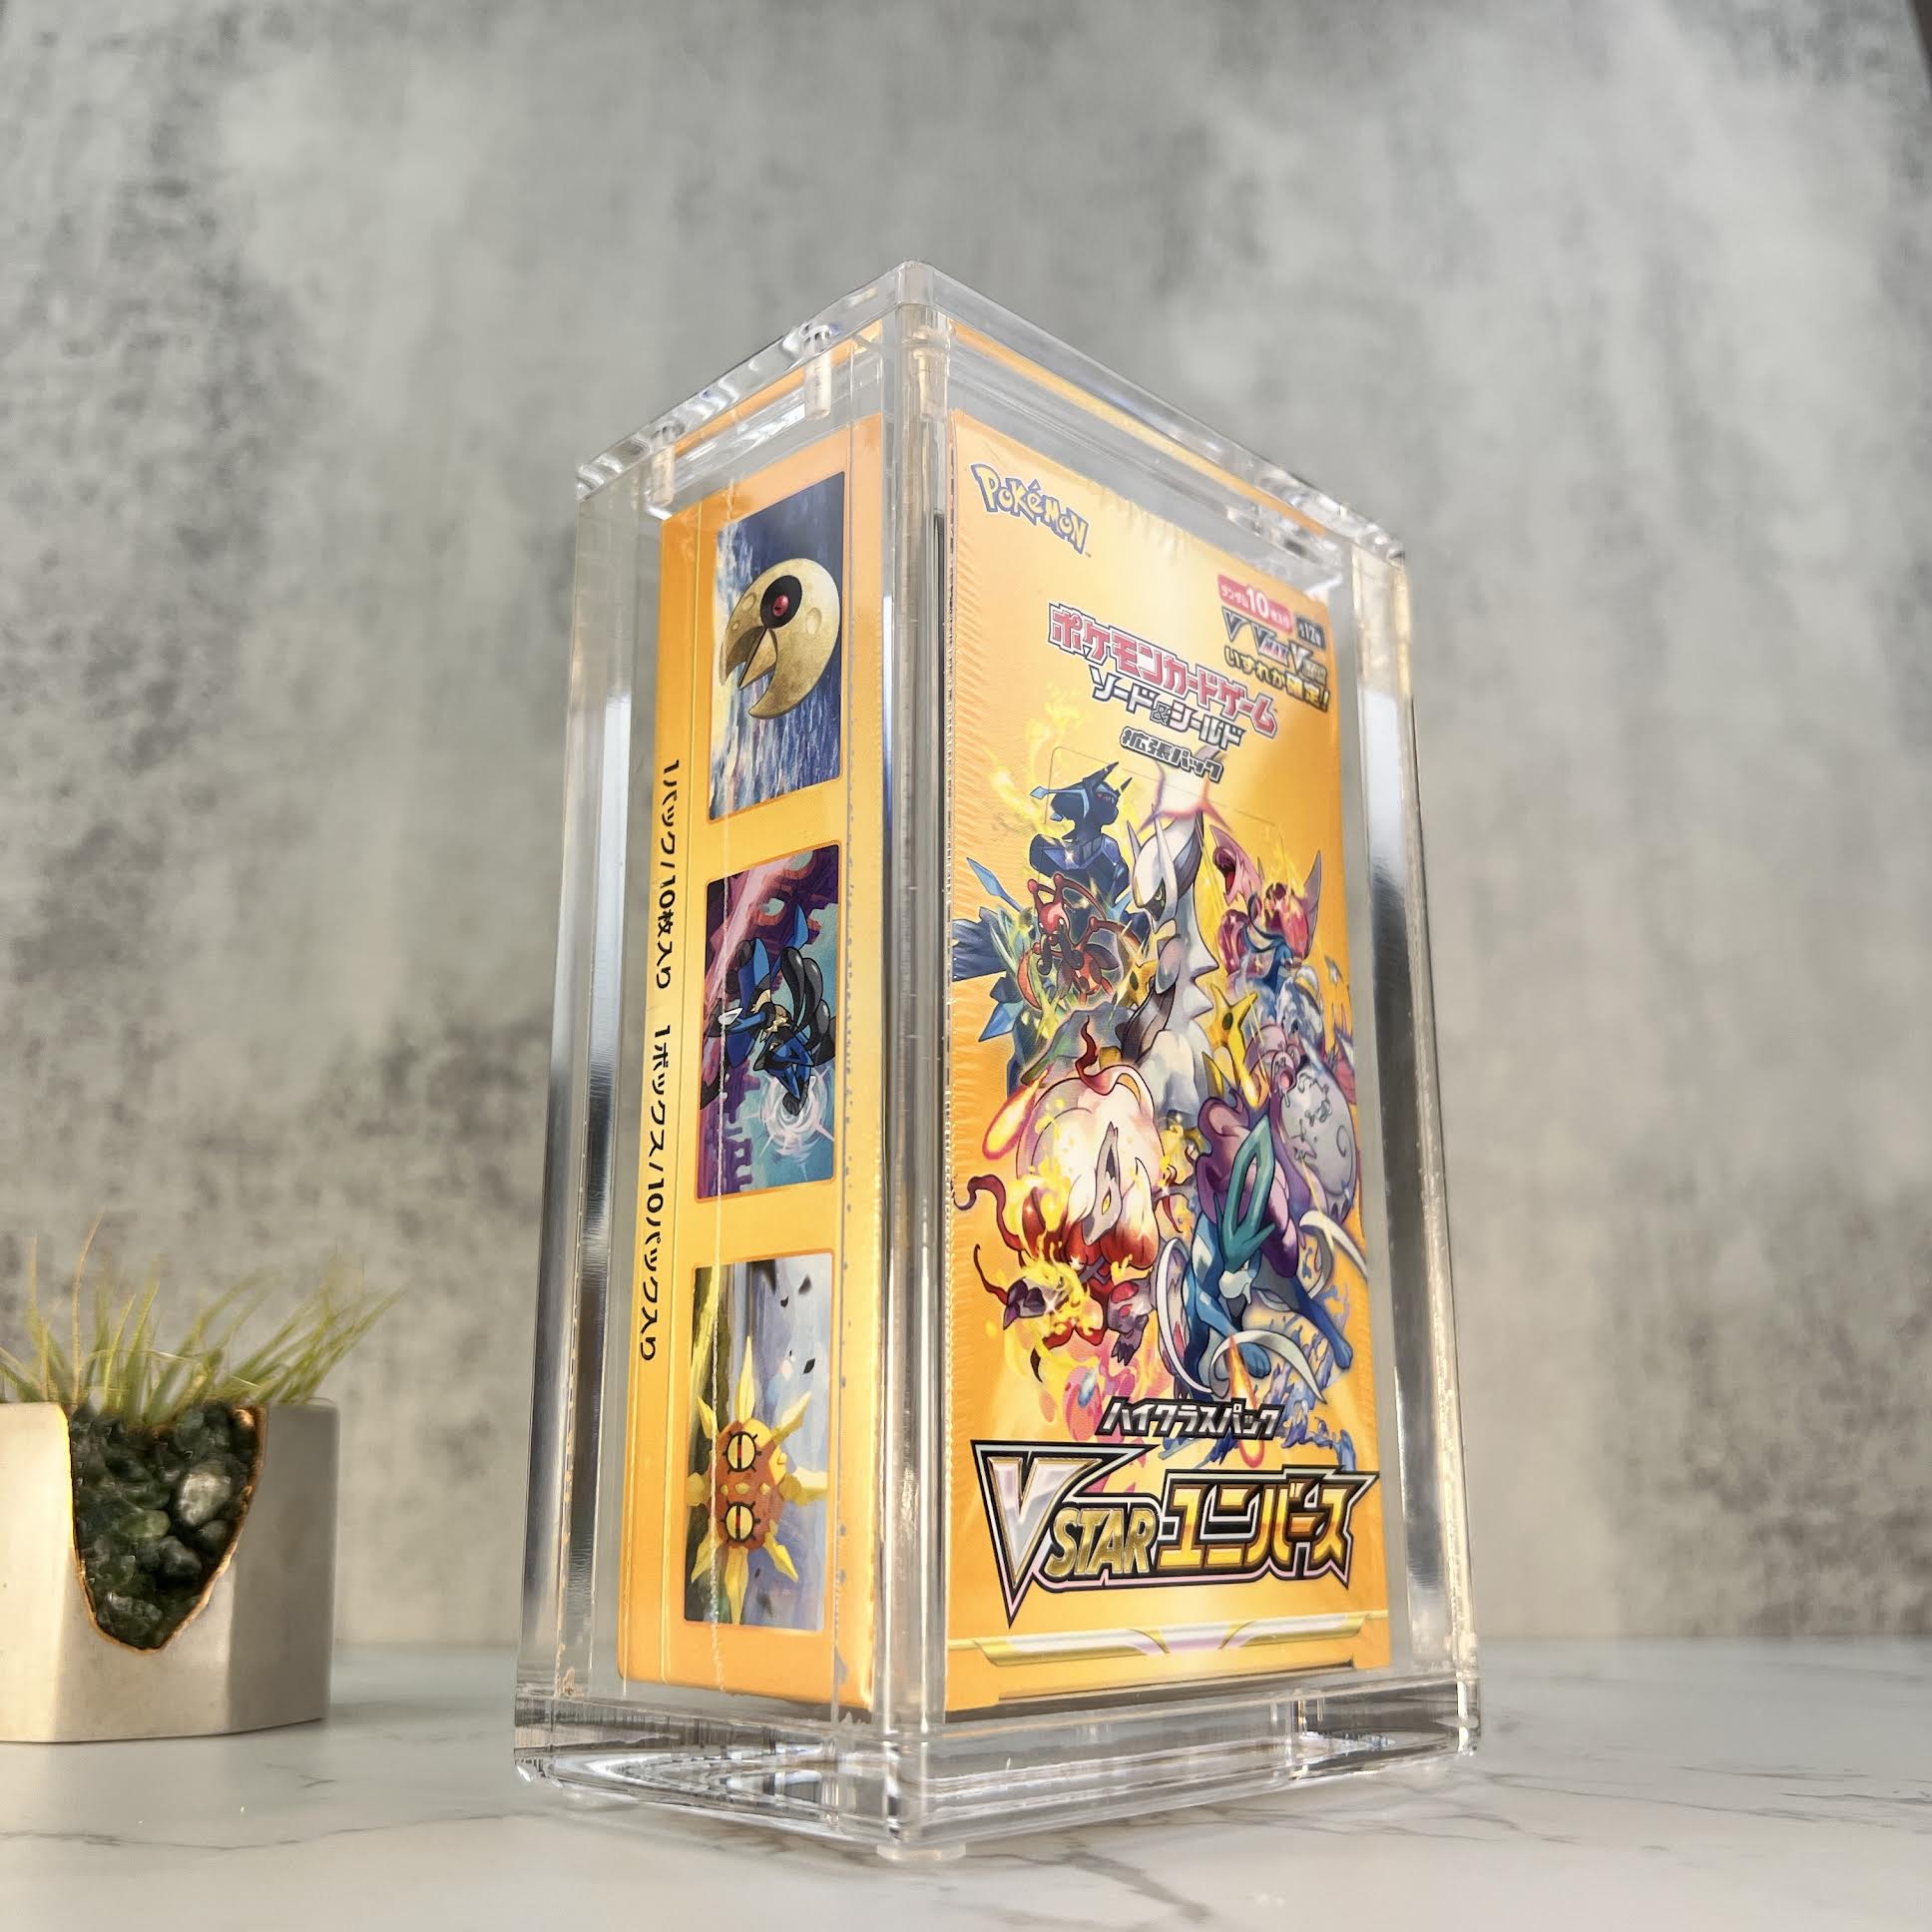 Ultra clear Pokemon Japanese booster box magnetic acrylic protective case, with crystal acrylic, with 99.6% UV protection against sun damage and fading. Fits Sword & Shield High Class, VMAX Climax Booster Box, VSTAR Universe, and more.